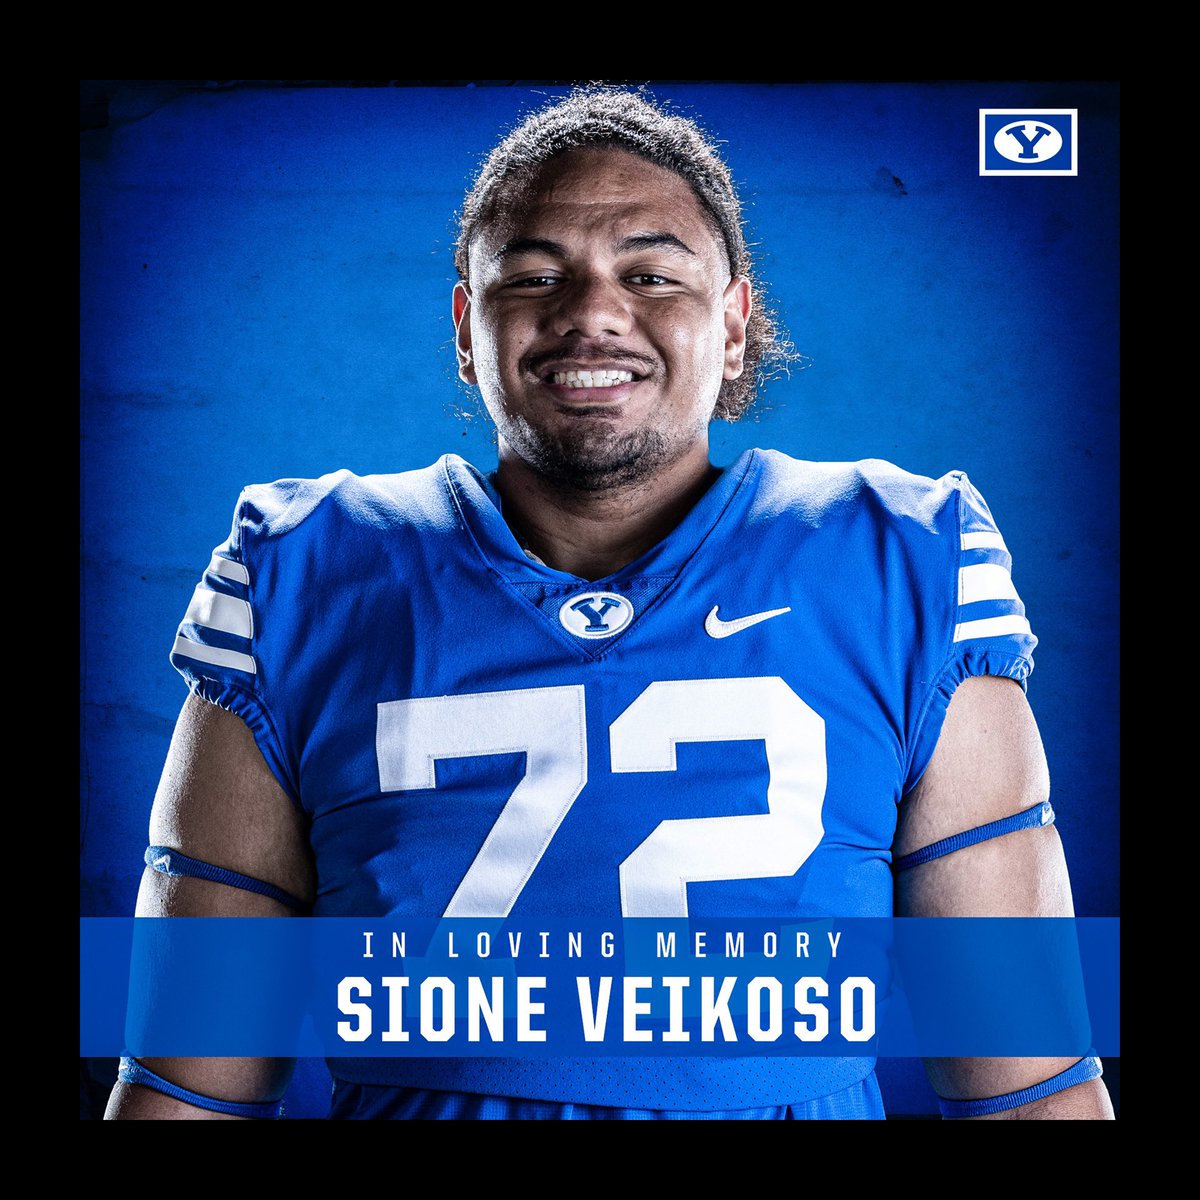 On behalf of the entire BYU Football family, our thoughts and prayers are with Sione's family and friends during this extremely difficult time. Rest in Love Sione. God be with you till we meet again.